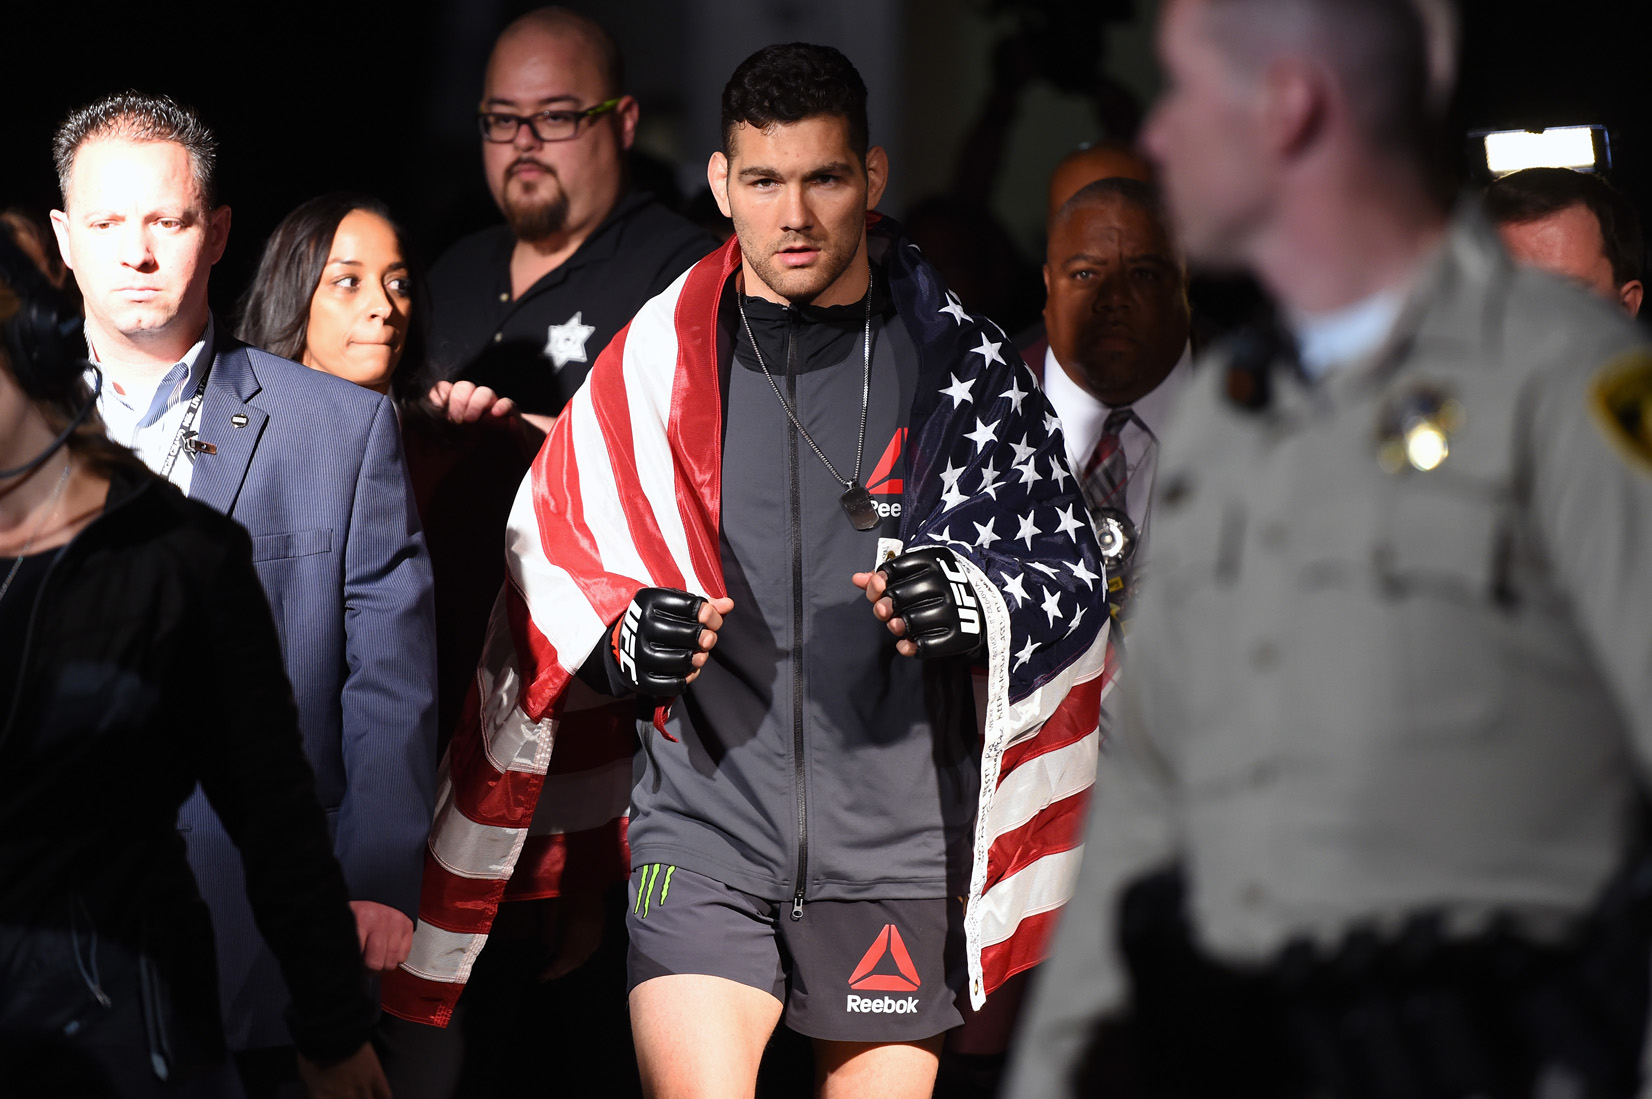 Monster Energy’s Chris Weidman To Fight on Main Card UFC 205 at Madison Square Garden in New York on November 12